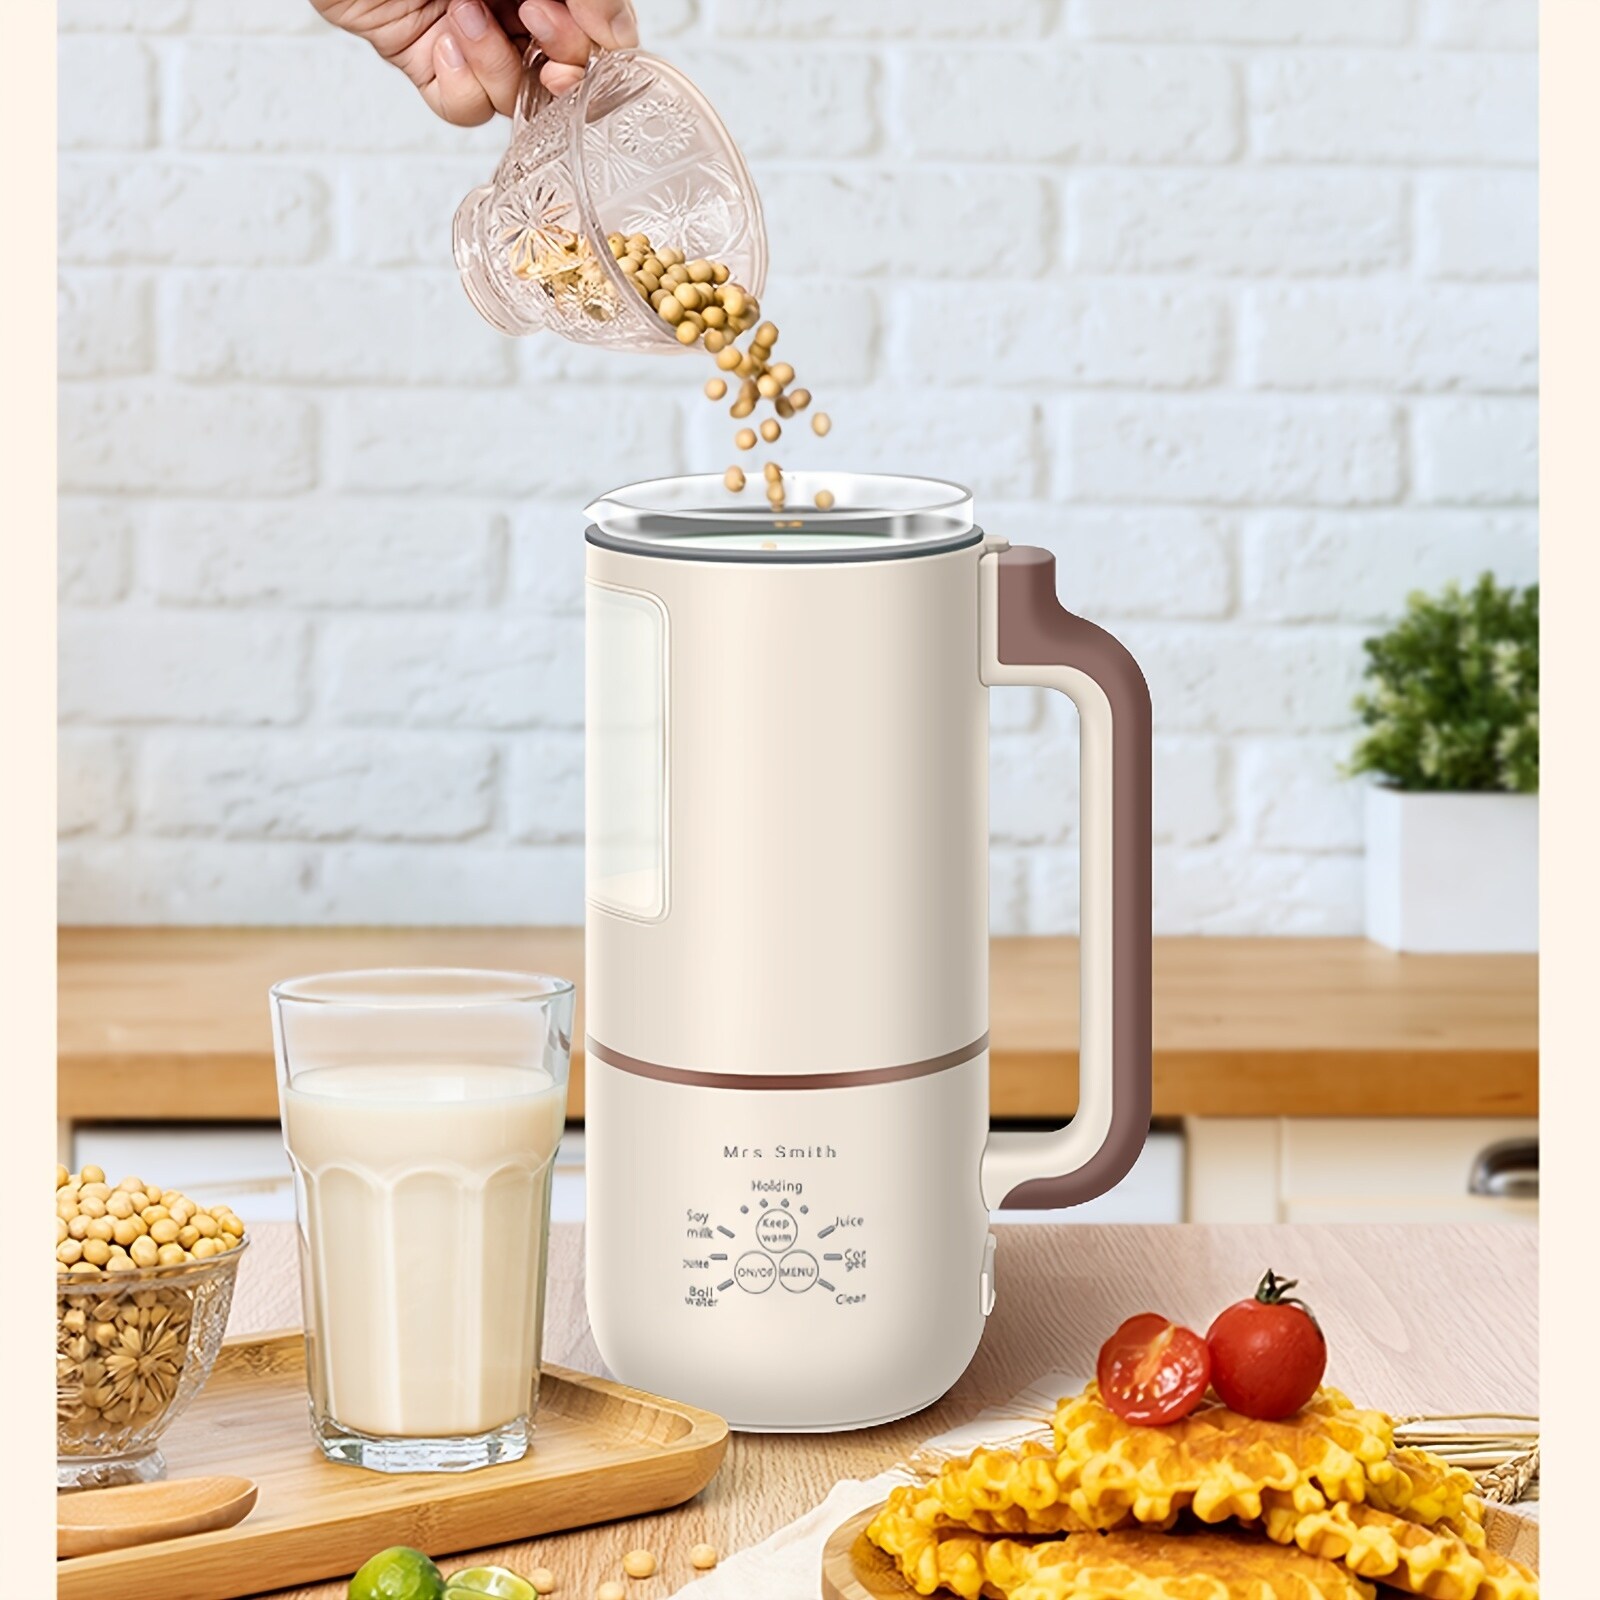 https://ak1.ostkcdn.com/images/products/is/images/direct/77874860ff42510045f3c0b0b4129a14497030c1/1000ml-Mini-Soybean-Milk-Maker%2CJuicer-Maker%2C-Free-Filtering%2C-Self-Cleaning-For-Household-1-4-Person%2CPortable-Soy-Milk-Machine.jpg